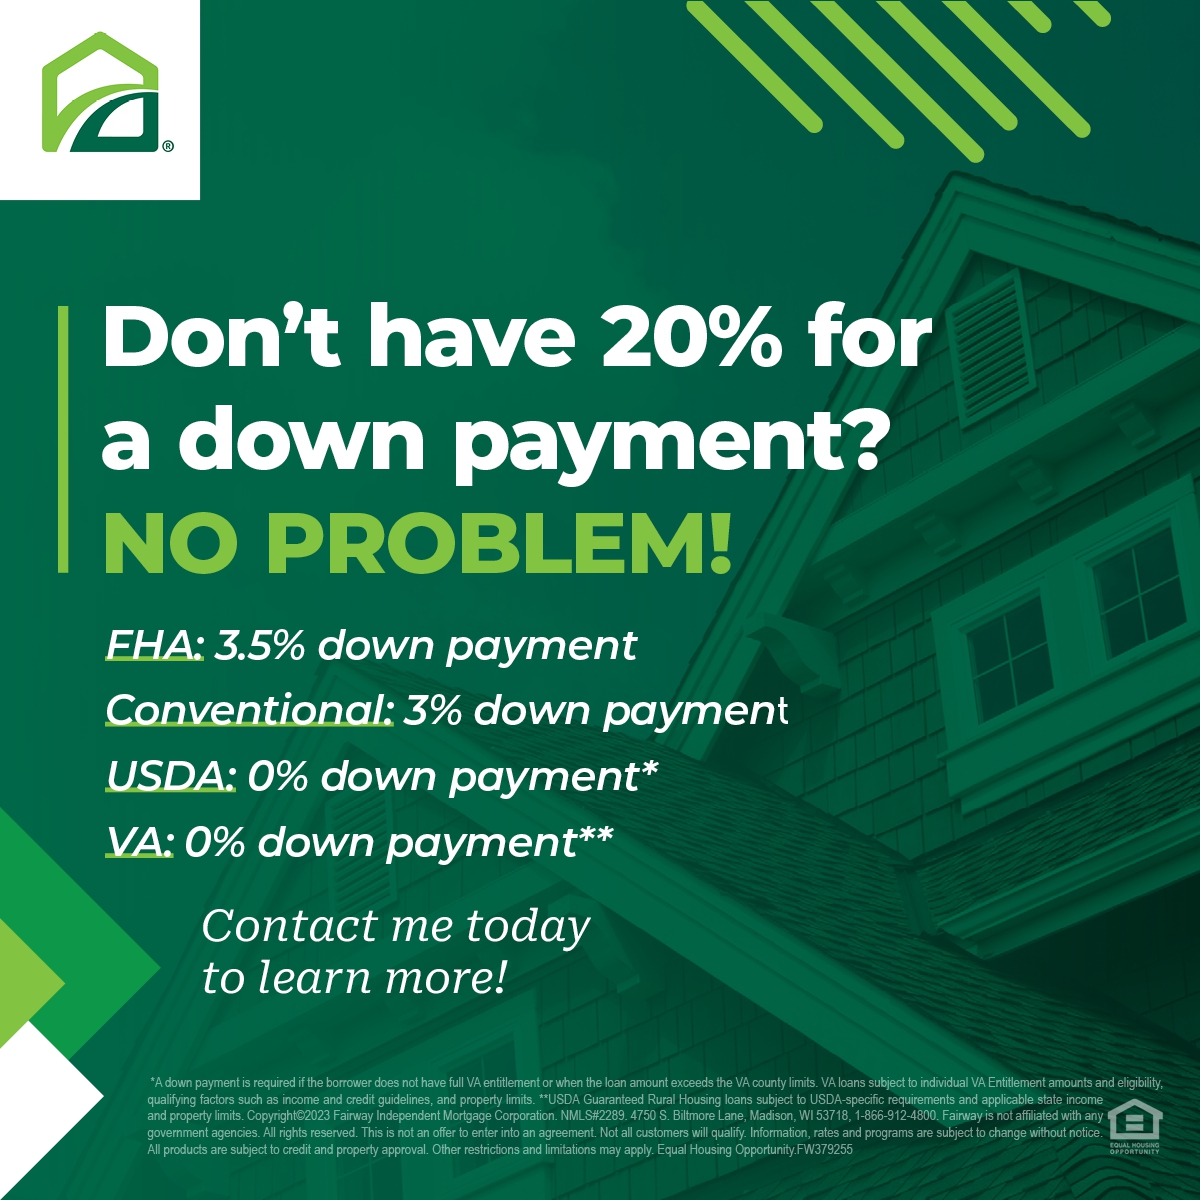 While putting 20% down has its benefits, there are loan programs that allow 5%, 3.5%, and even 0% down payments. Contact me today to learn more! #jerry_the mortgageguy #FTHB #mortgagematters #yourloanexpert #mortgagemonday mobile.fairwaynow.com/homehub/signup…